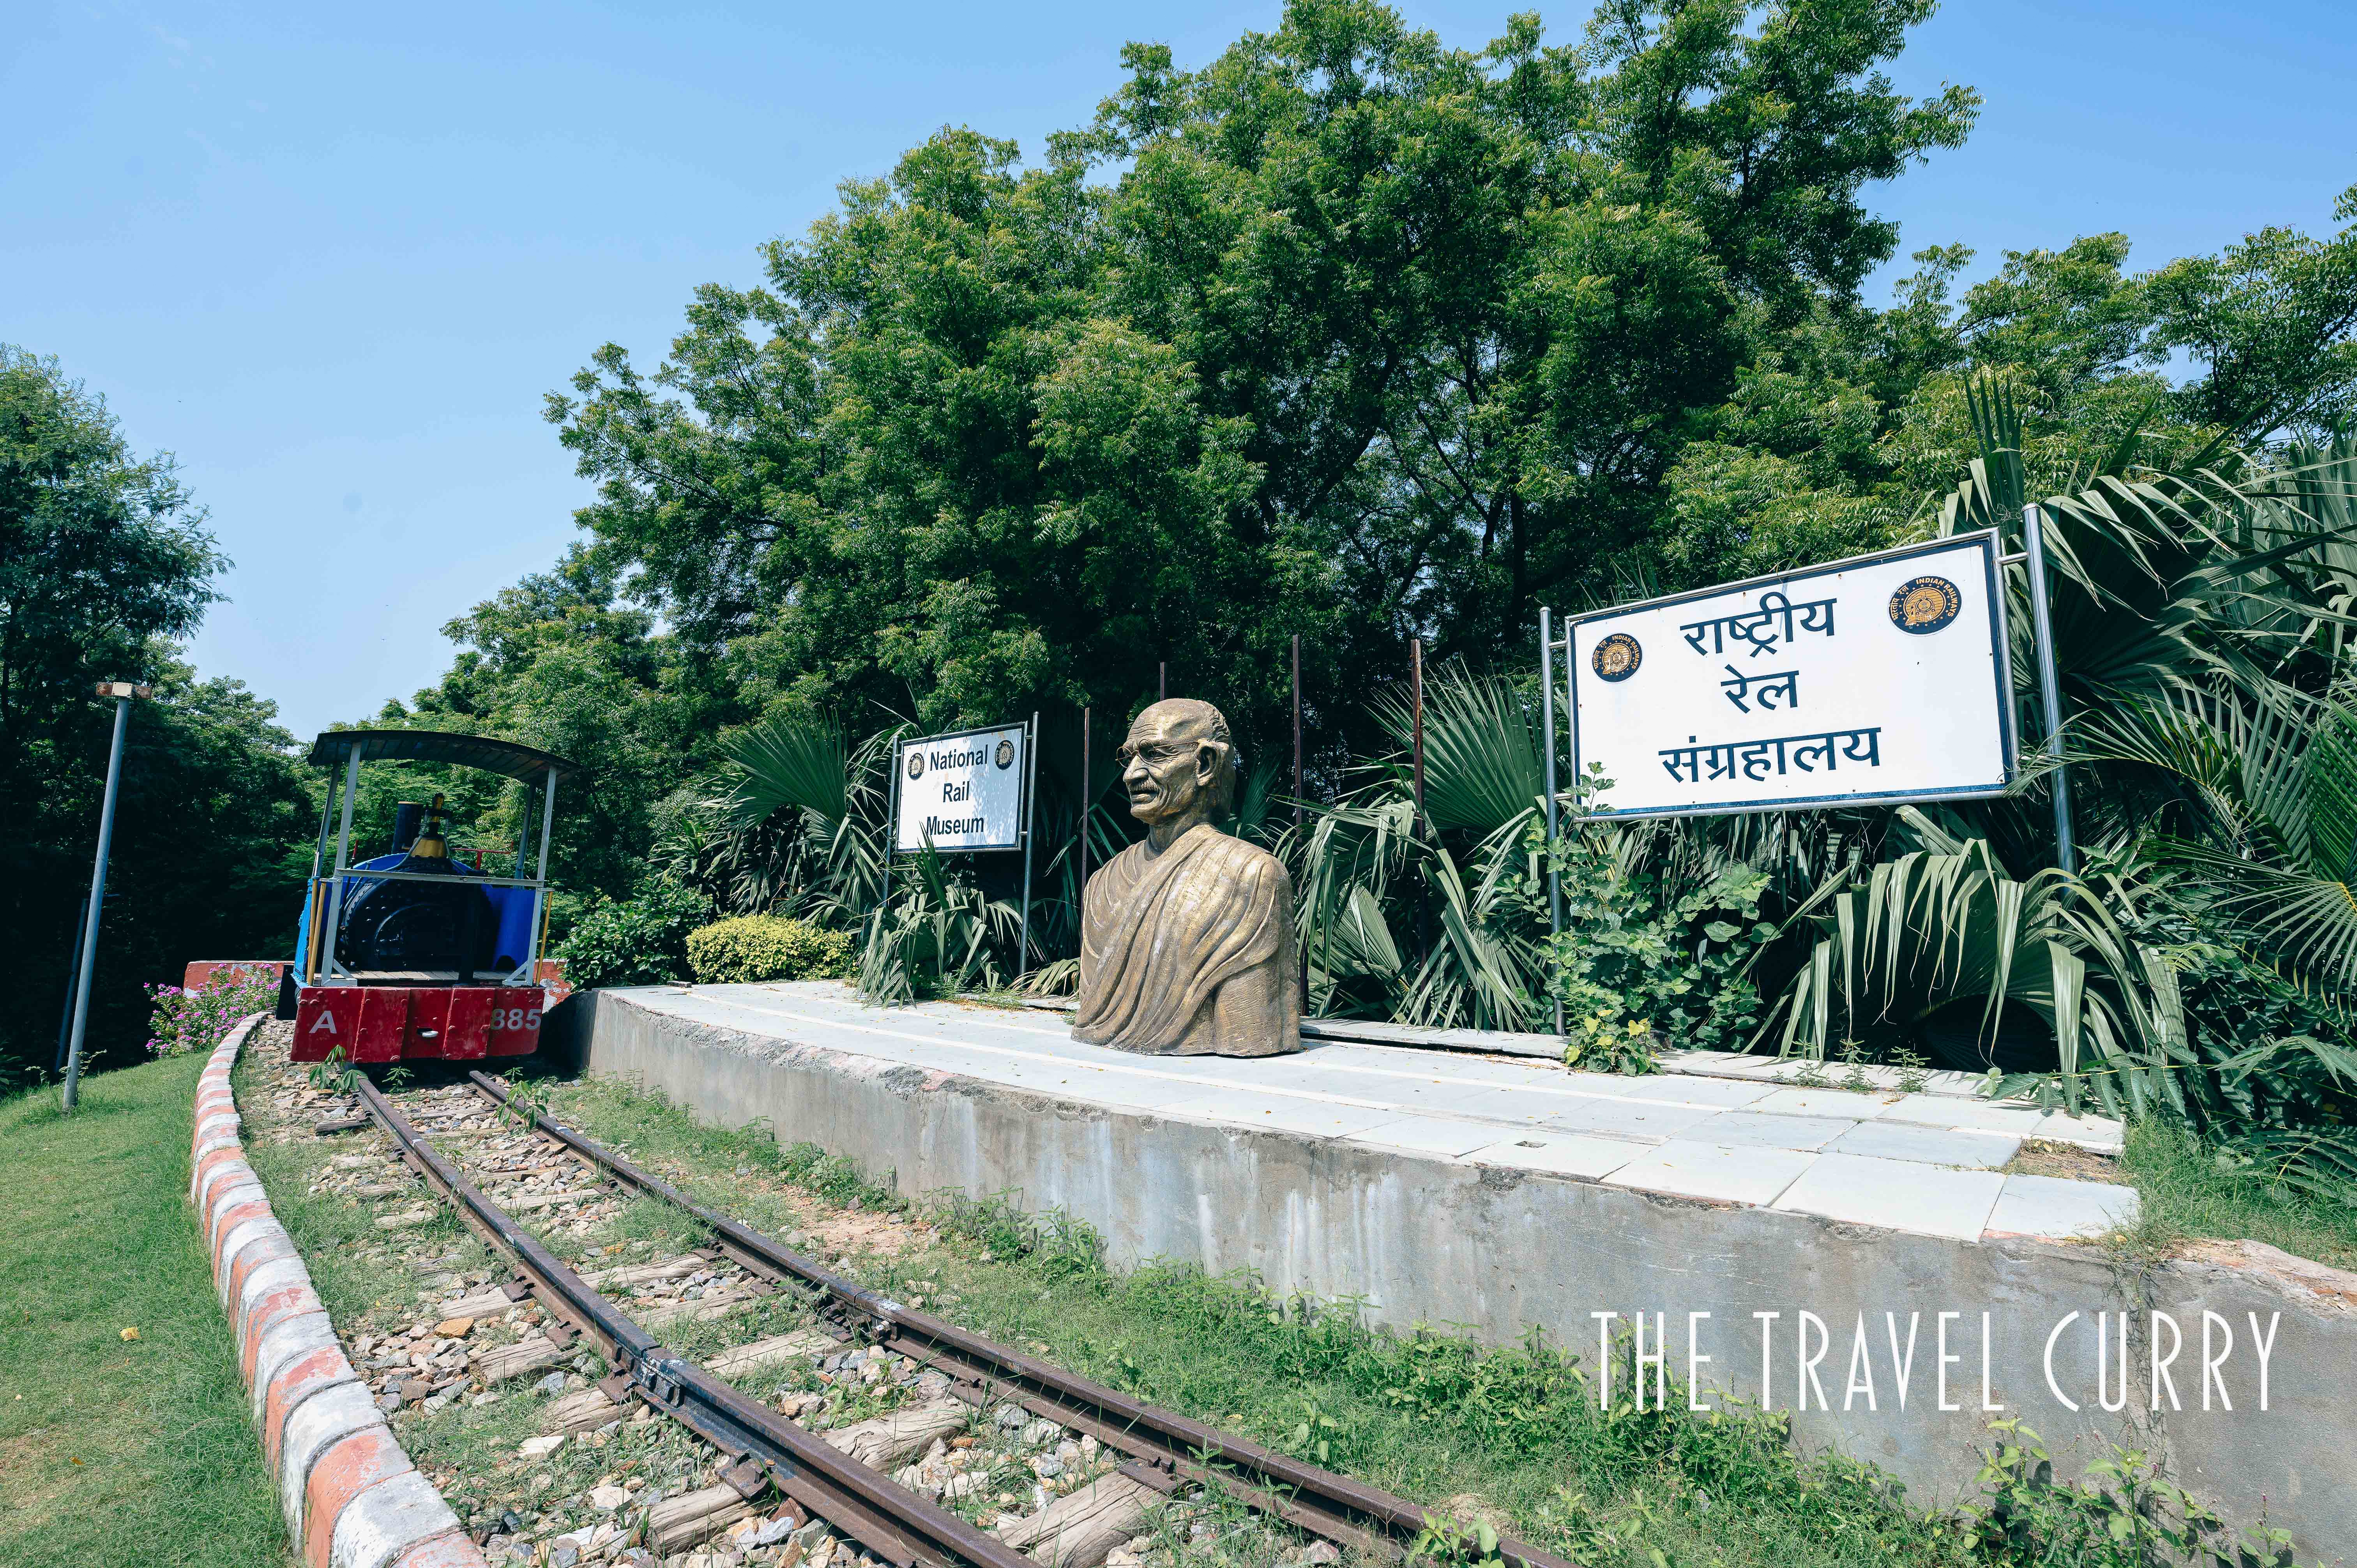 Gandhi statue with the name board at Delhi's National Rail Museum